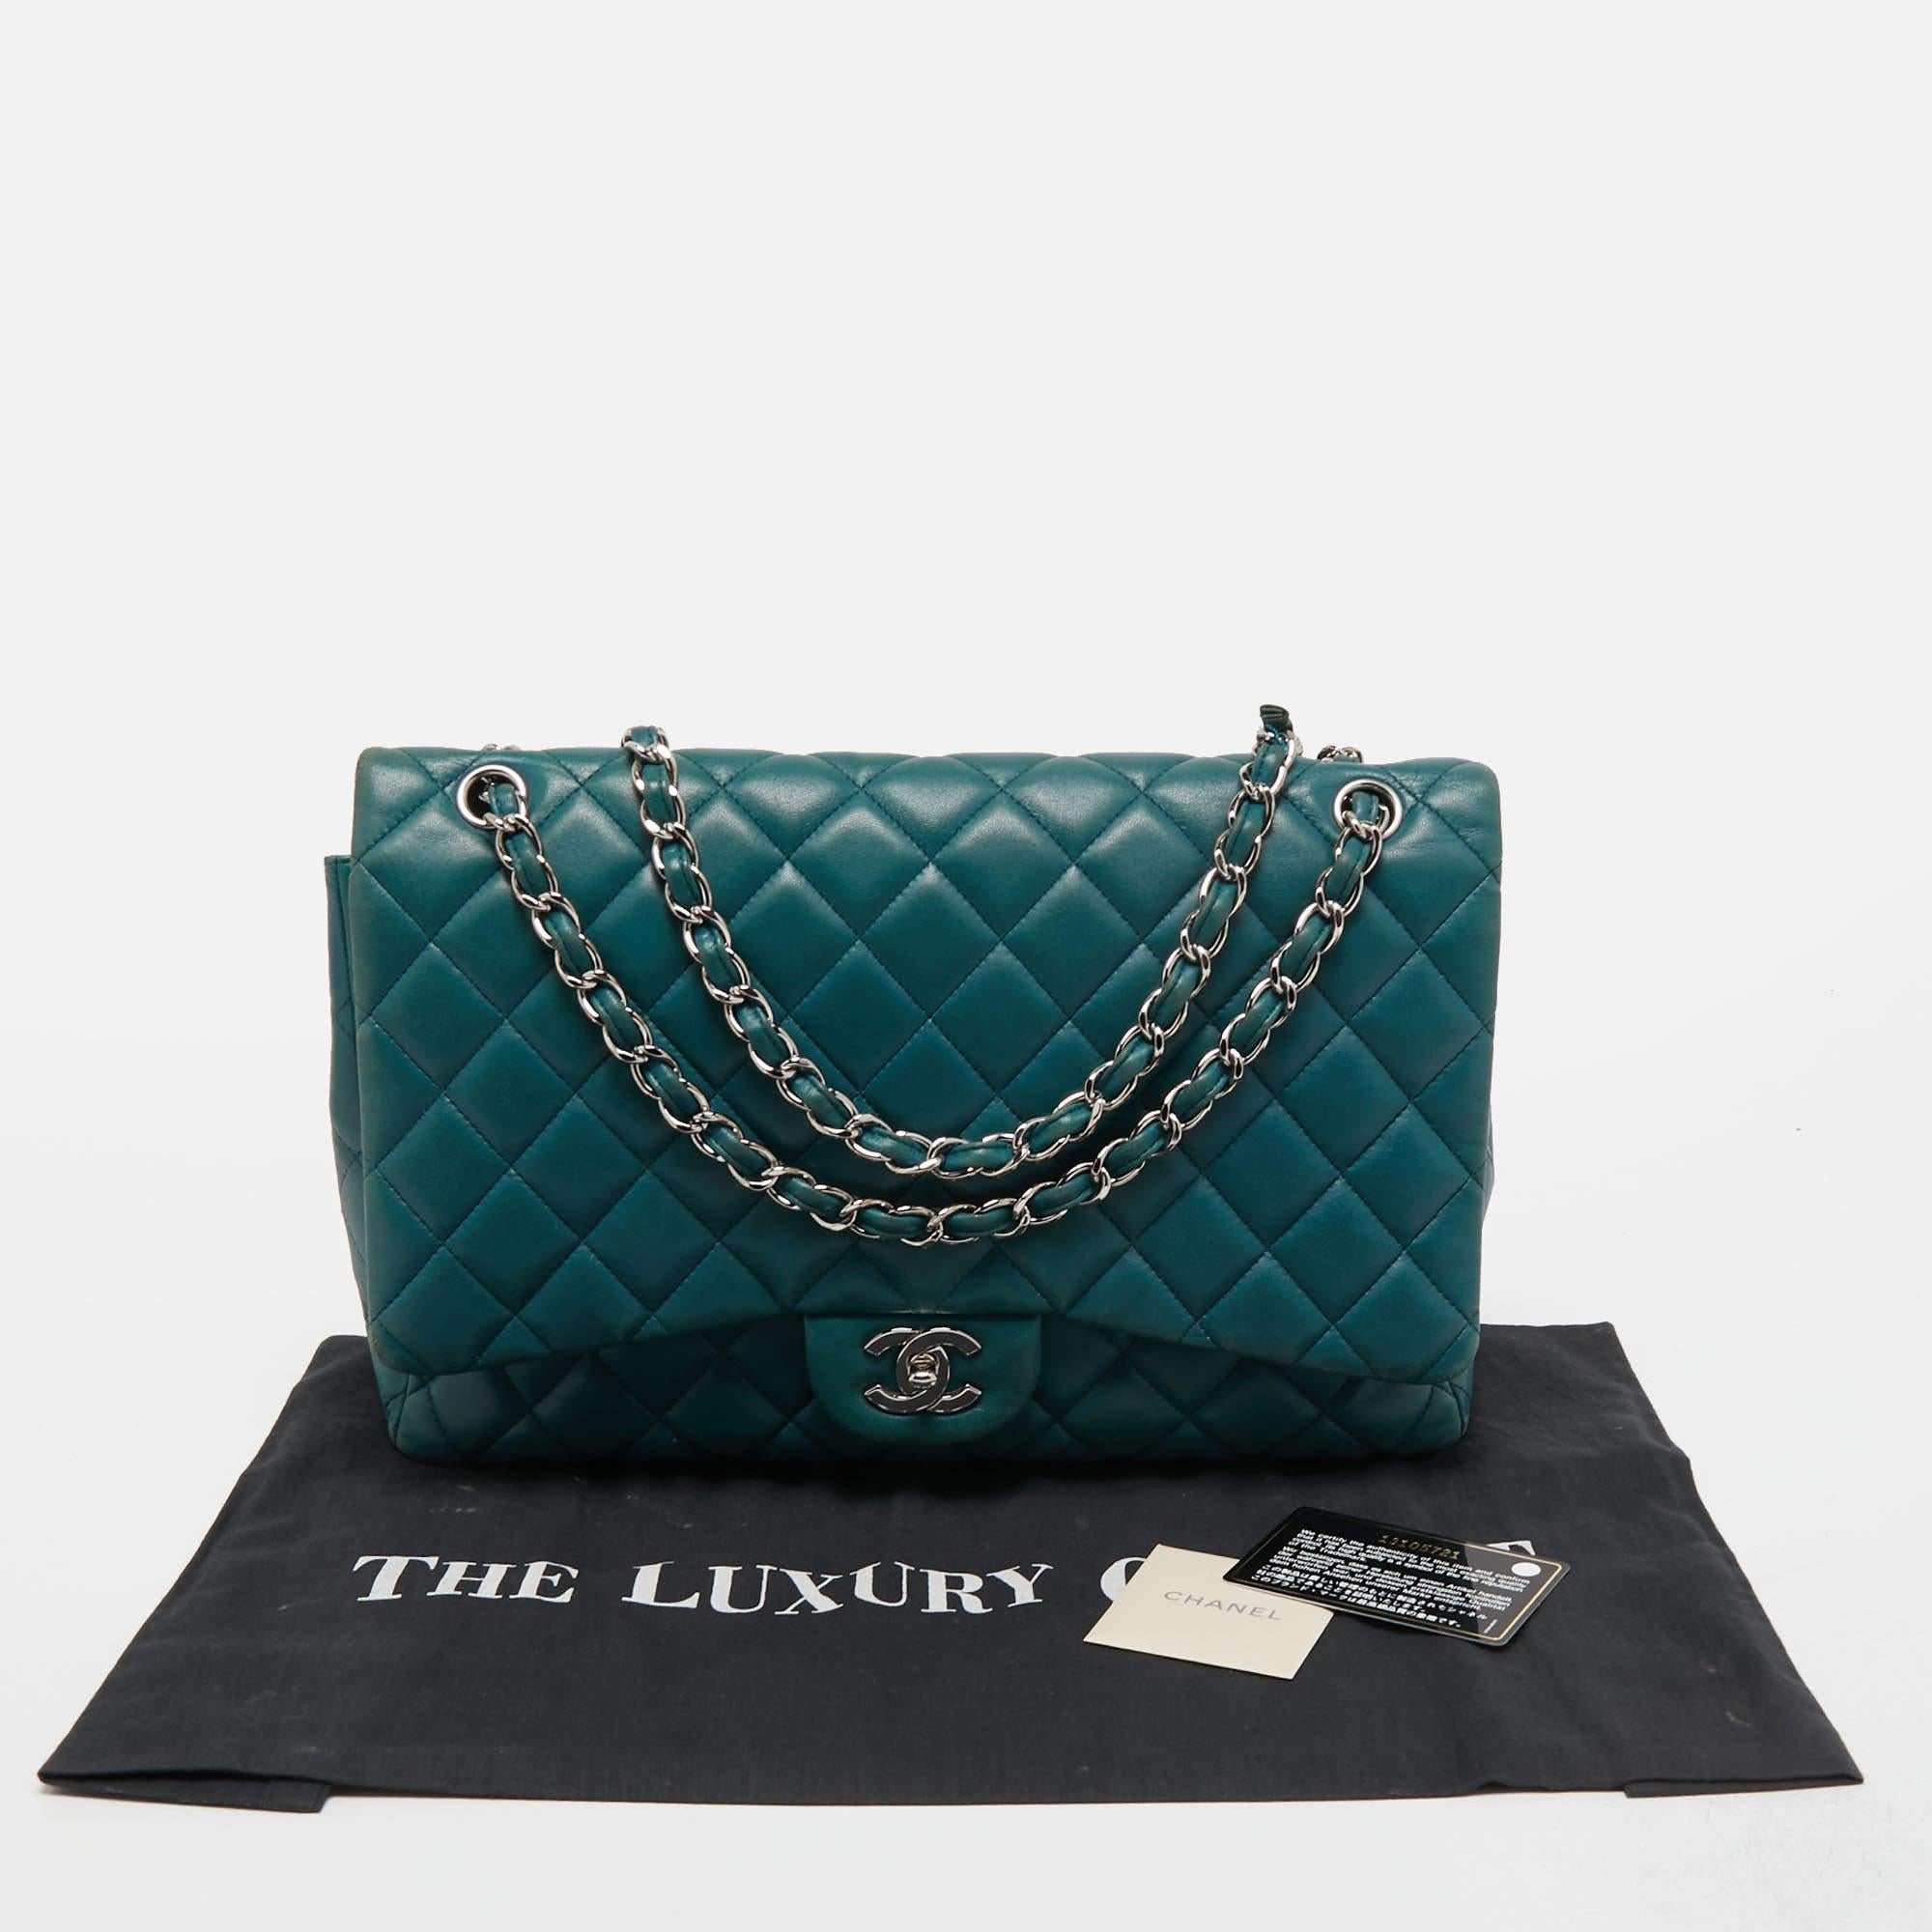 Chanel Teal Blue Quilted Leather Maxi Classic Single Flap Shoulder Bag 16